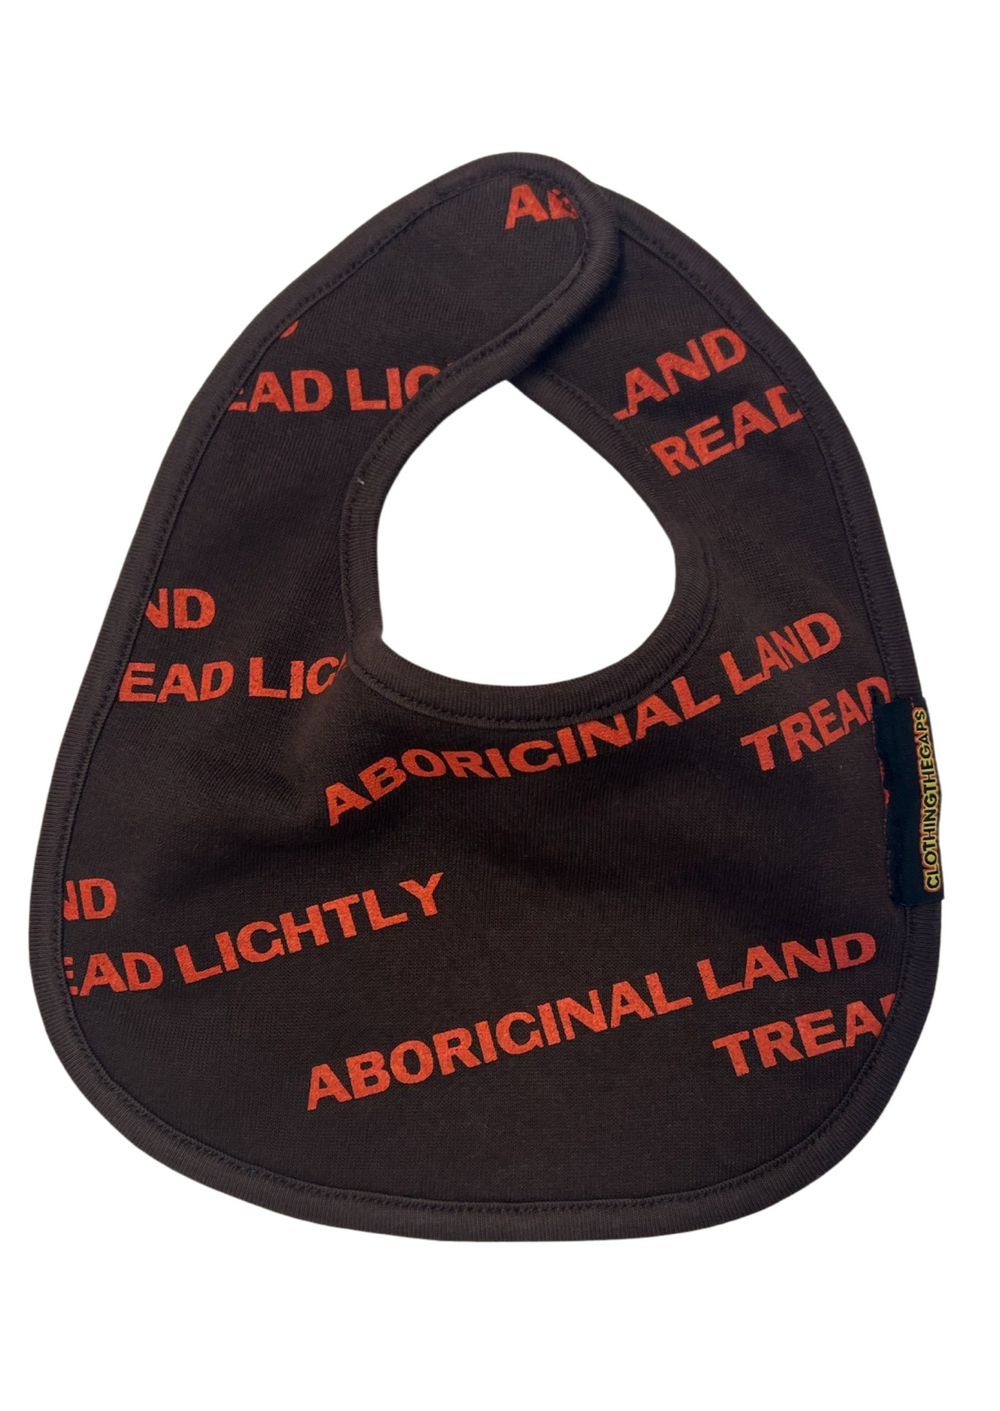 Clothing The Gaps. Bubup Tread Lightly baby bibs. Comes in orange/brown and orange/blue Chocolate Brown bib with repeating pattern all over crew of the words 'Aboriginal Land Tread Lightly' text in a light blue colour or orange colour. Includes Velcro to attach around babies neck.